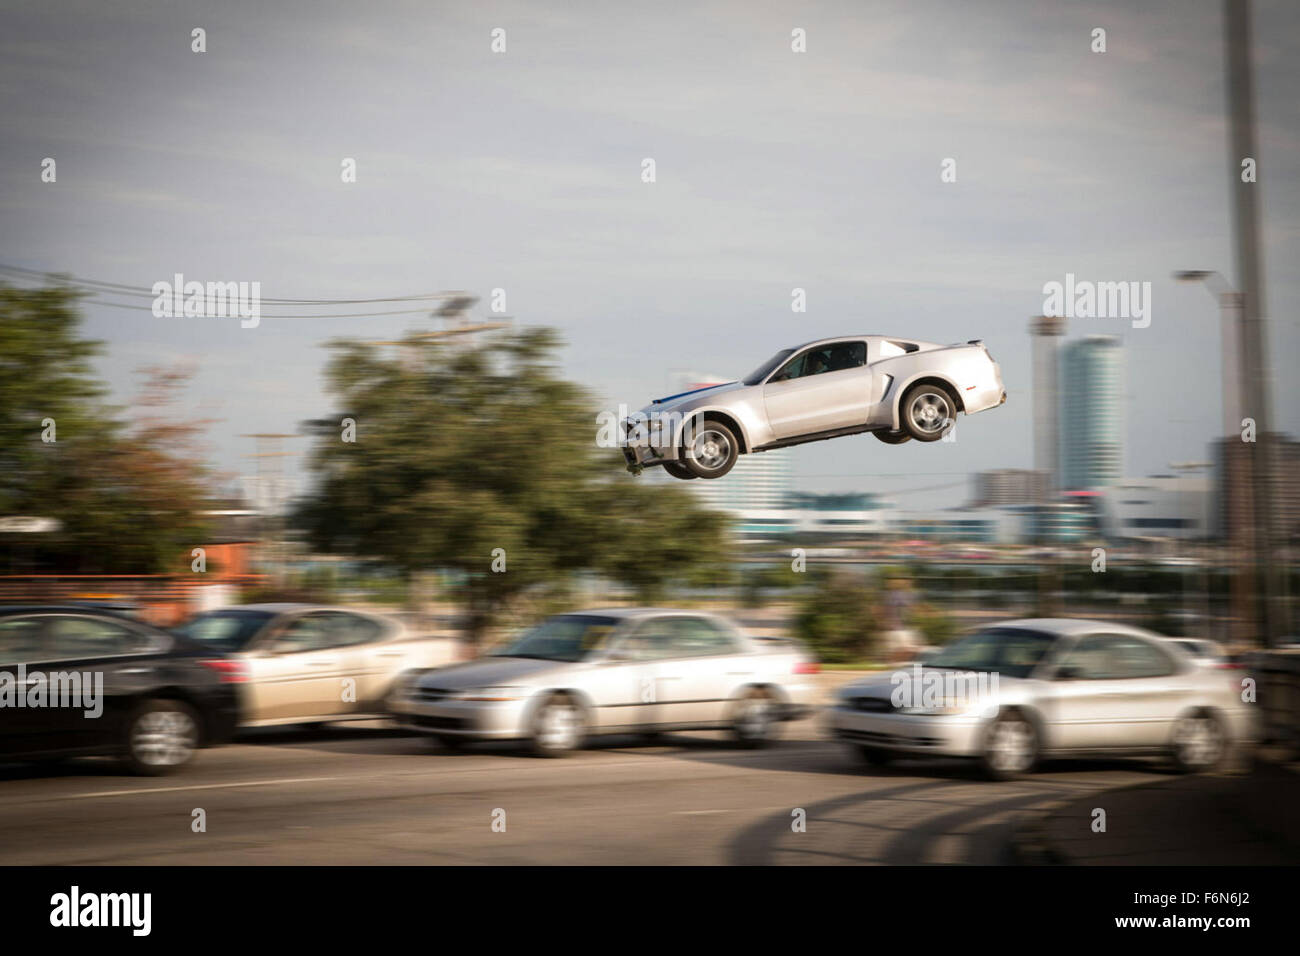 10+ Need For Speed Stock Videos and Royalty-Free Footage - iStock